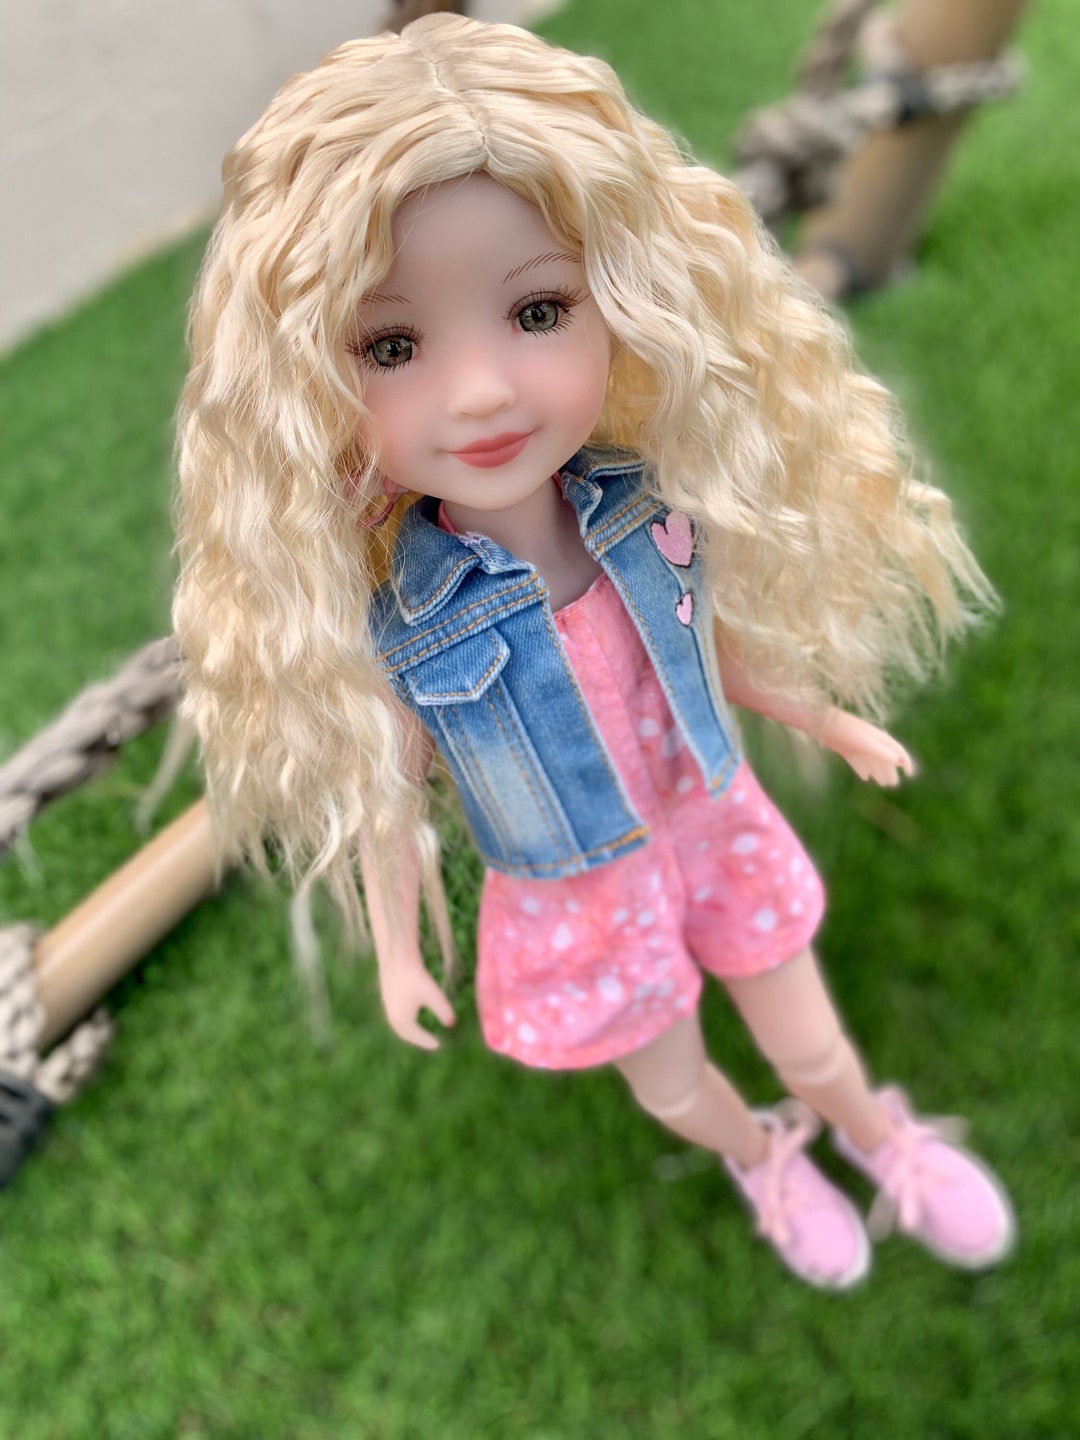 American Doll Wigs Sweet Ginger Curly 18inch Doll Wig ,doll of A Kind,10-11  Head Size,fit 18 American Dolls OG Blythe Gotz AG Doll 